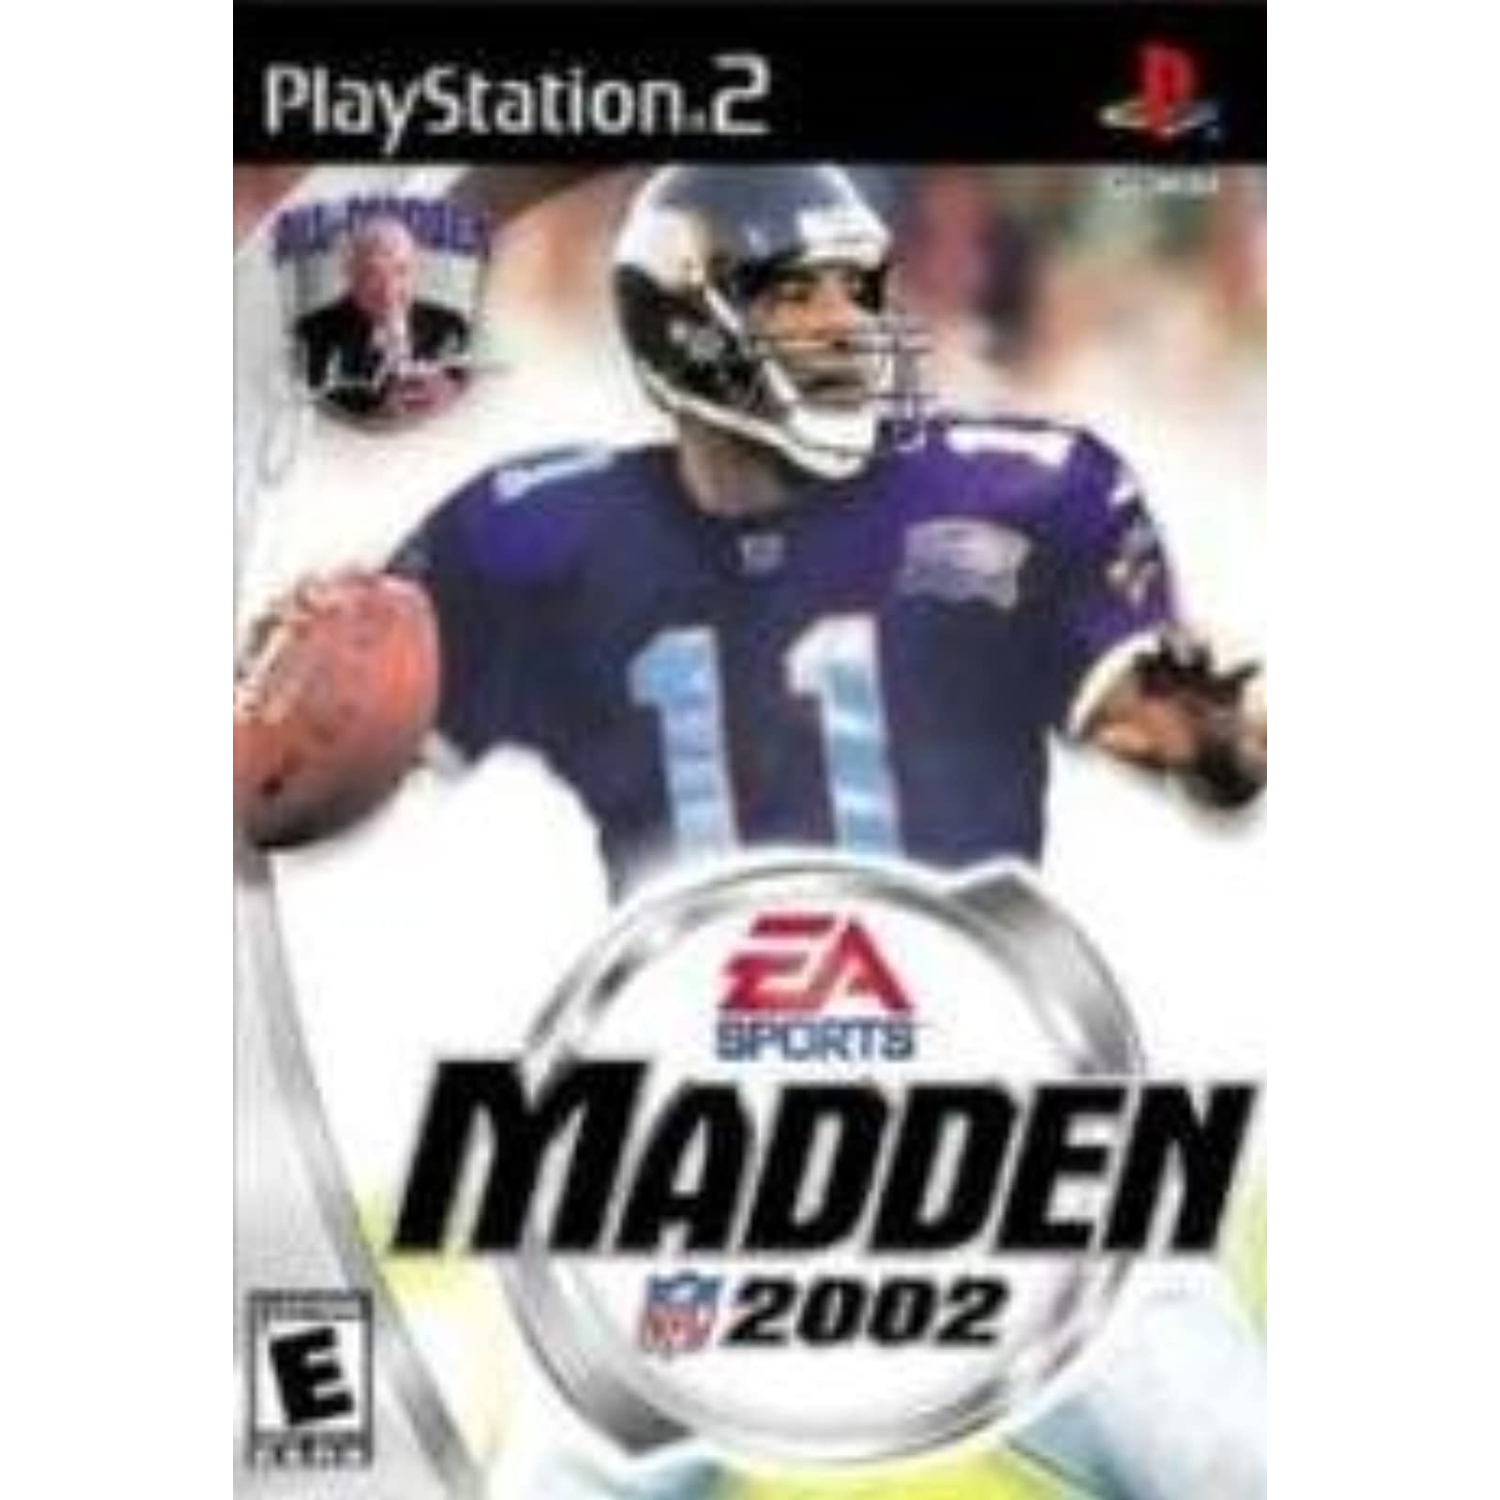 Previously Played - Madden NFL 2002 For PlayStation 2 PS2 Football